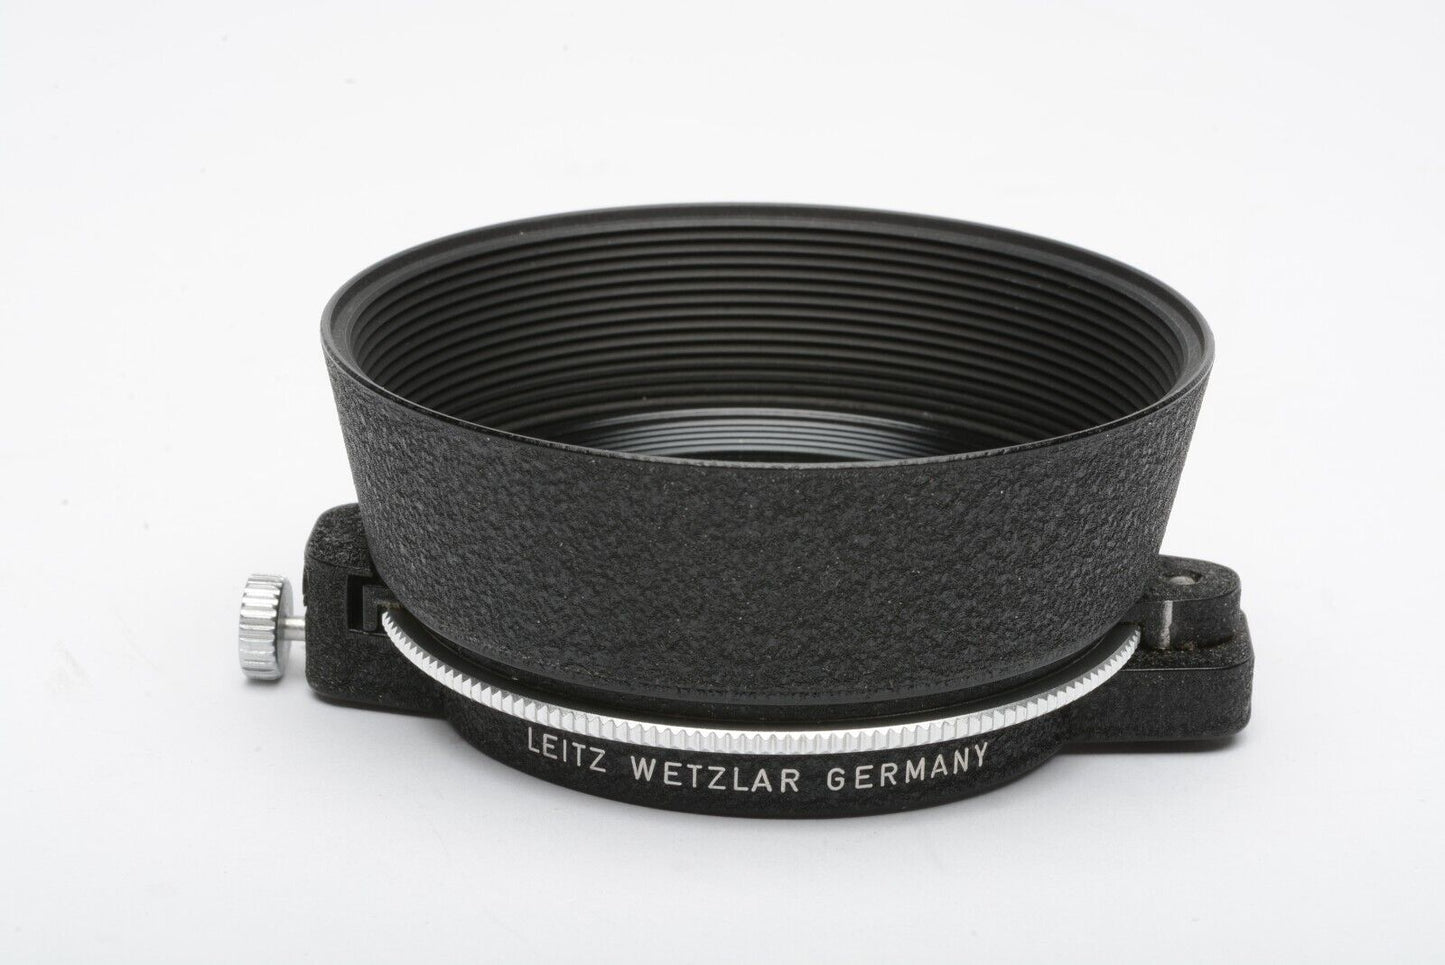 MINT- LEICA #13352 SWING OUT POLARIZING FILTER WITH LENS SHADE E39